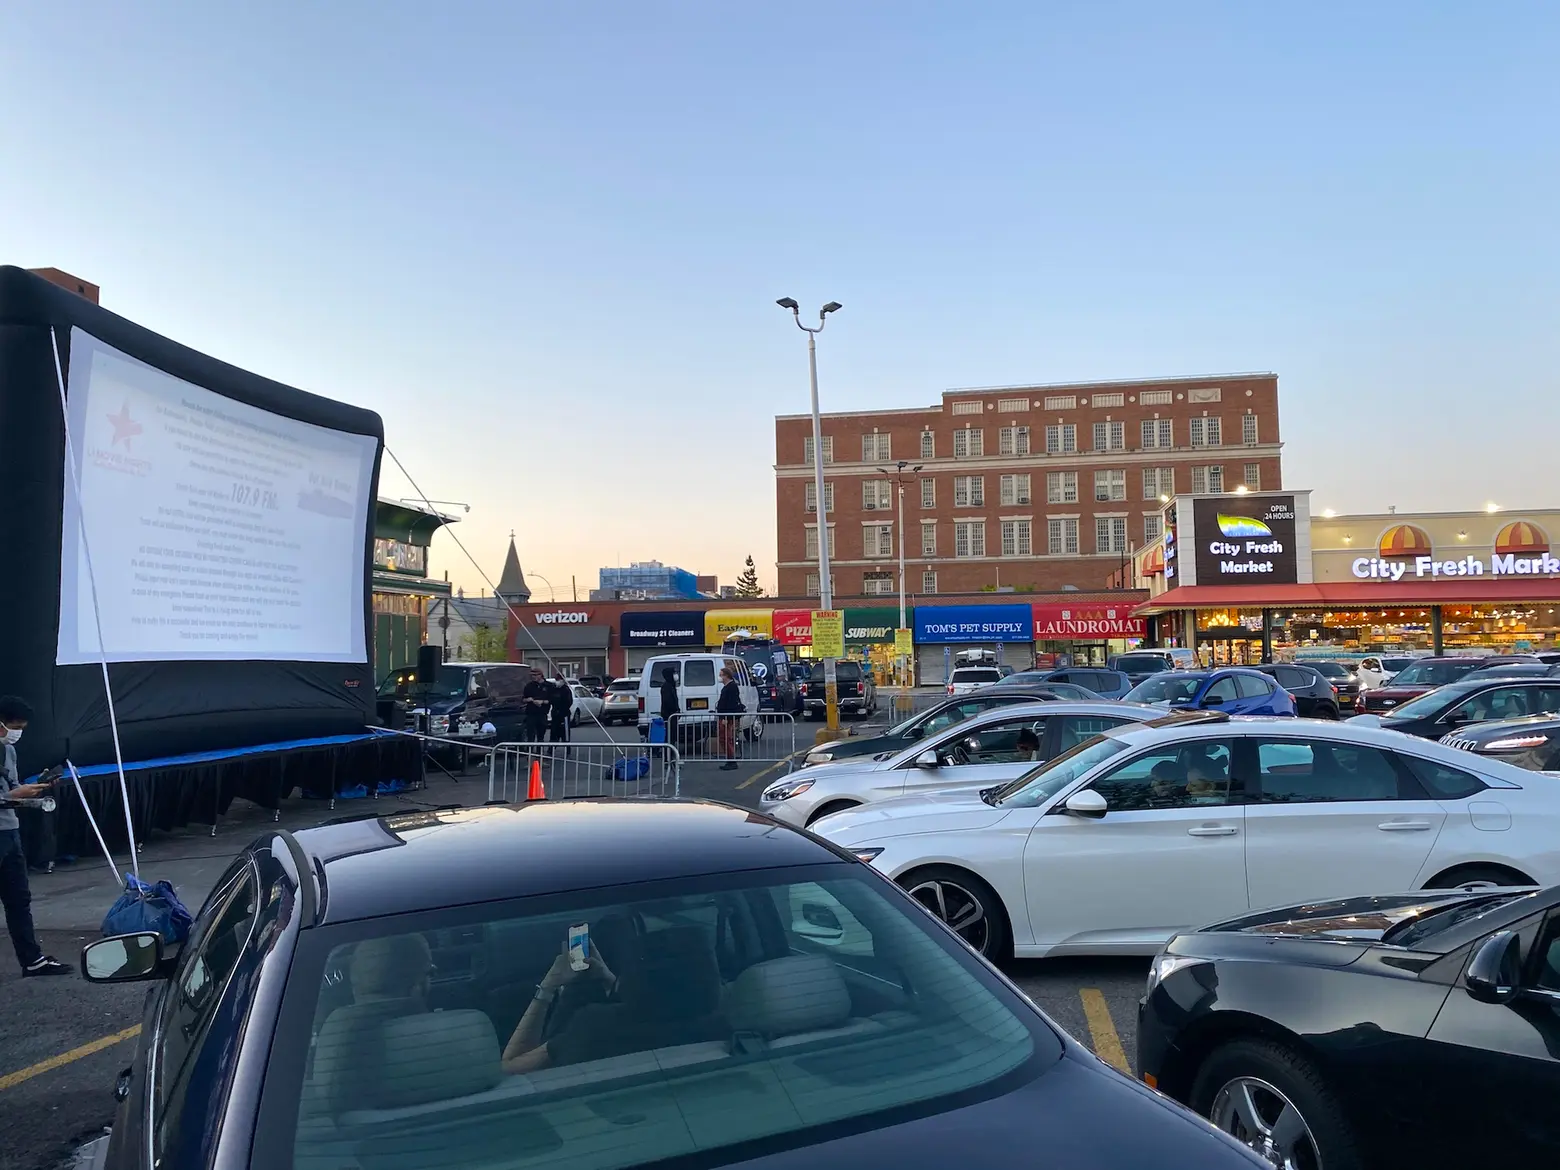 18 drive-in movie theaters in and around New York City